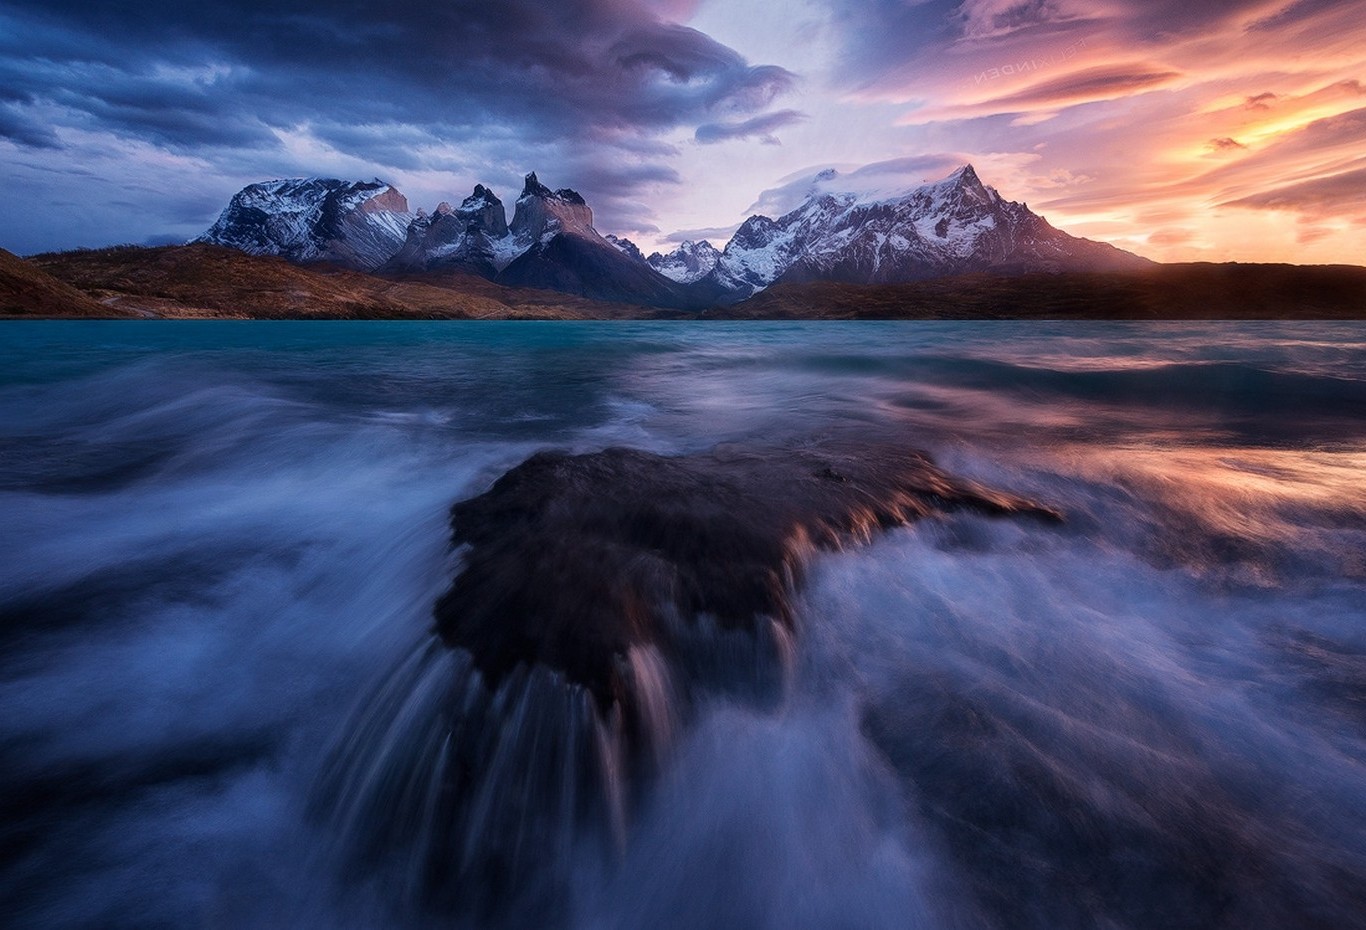 sunset, Mountain, Torres Del Paine, Lake, Snowy Peak, Clouds, Waterfall, Wind, Water, Chile, Patagonia, Landscape Wallpaper